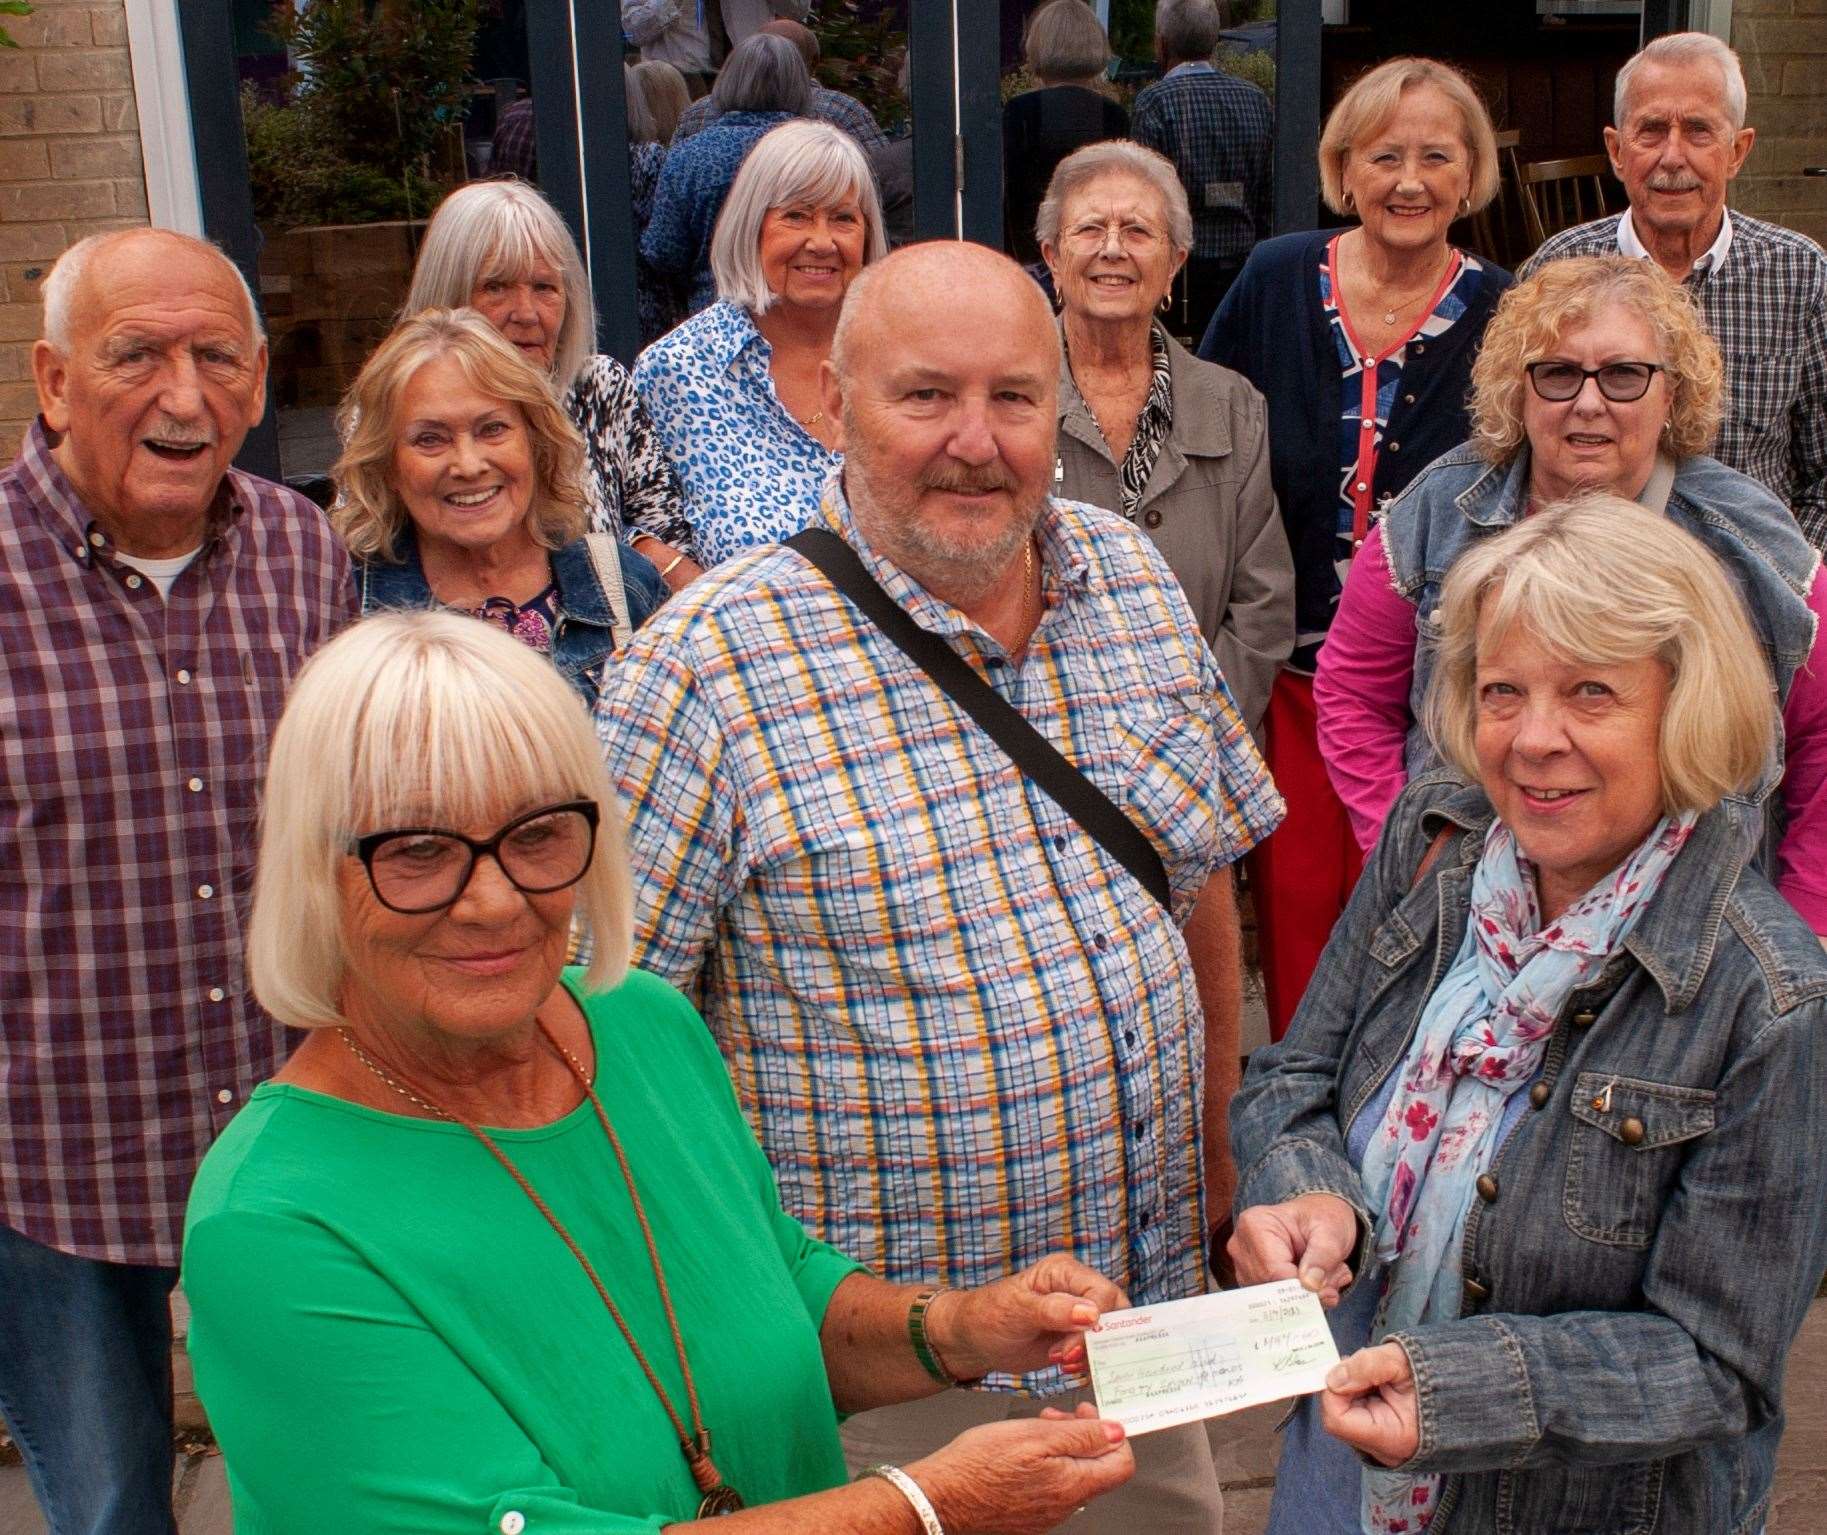 Family and friends watch on as Jeanette Stapleton of the Parkinson’s group receives a cheque from Patsy Ashwood